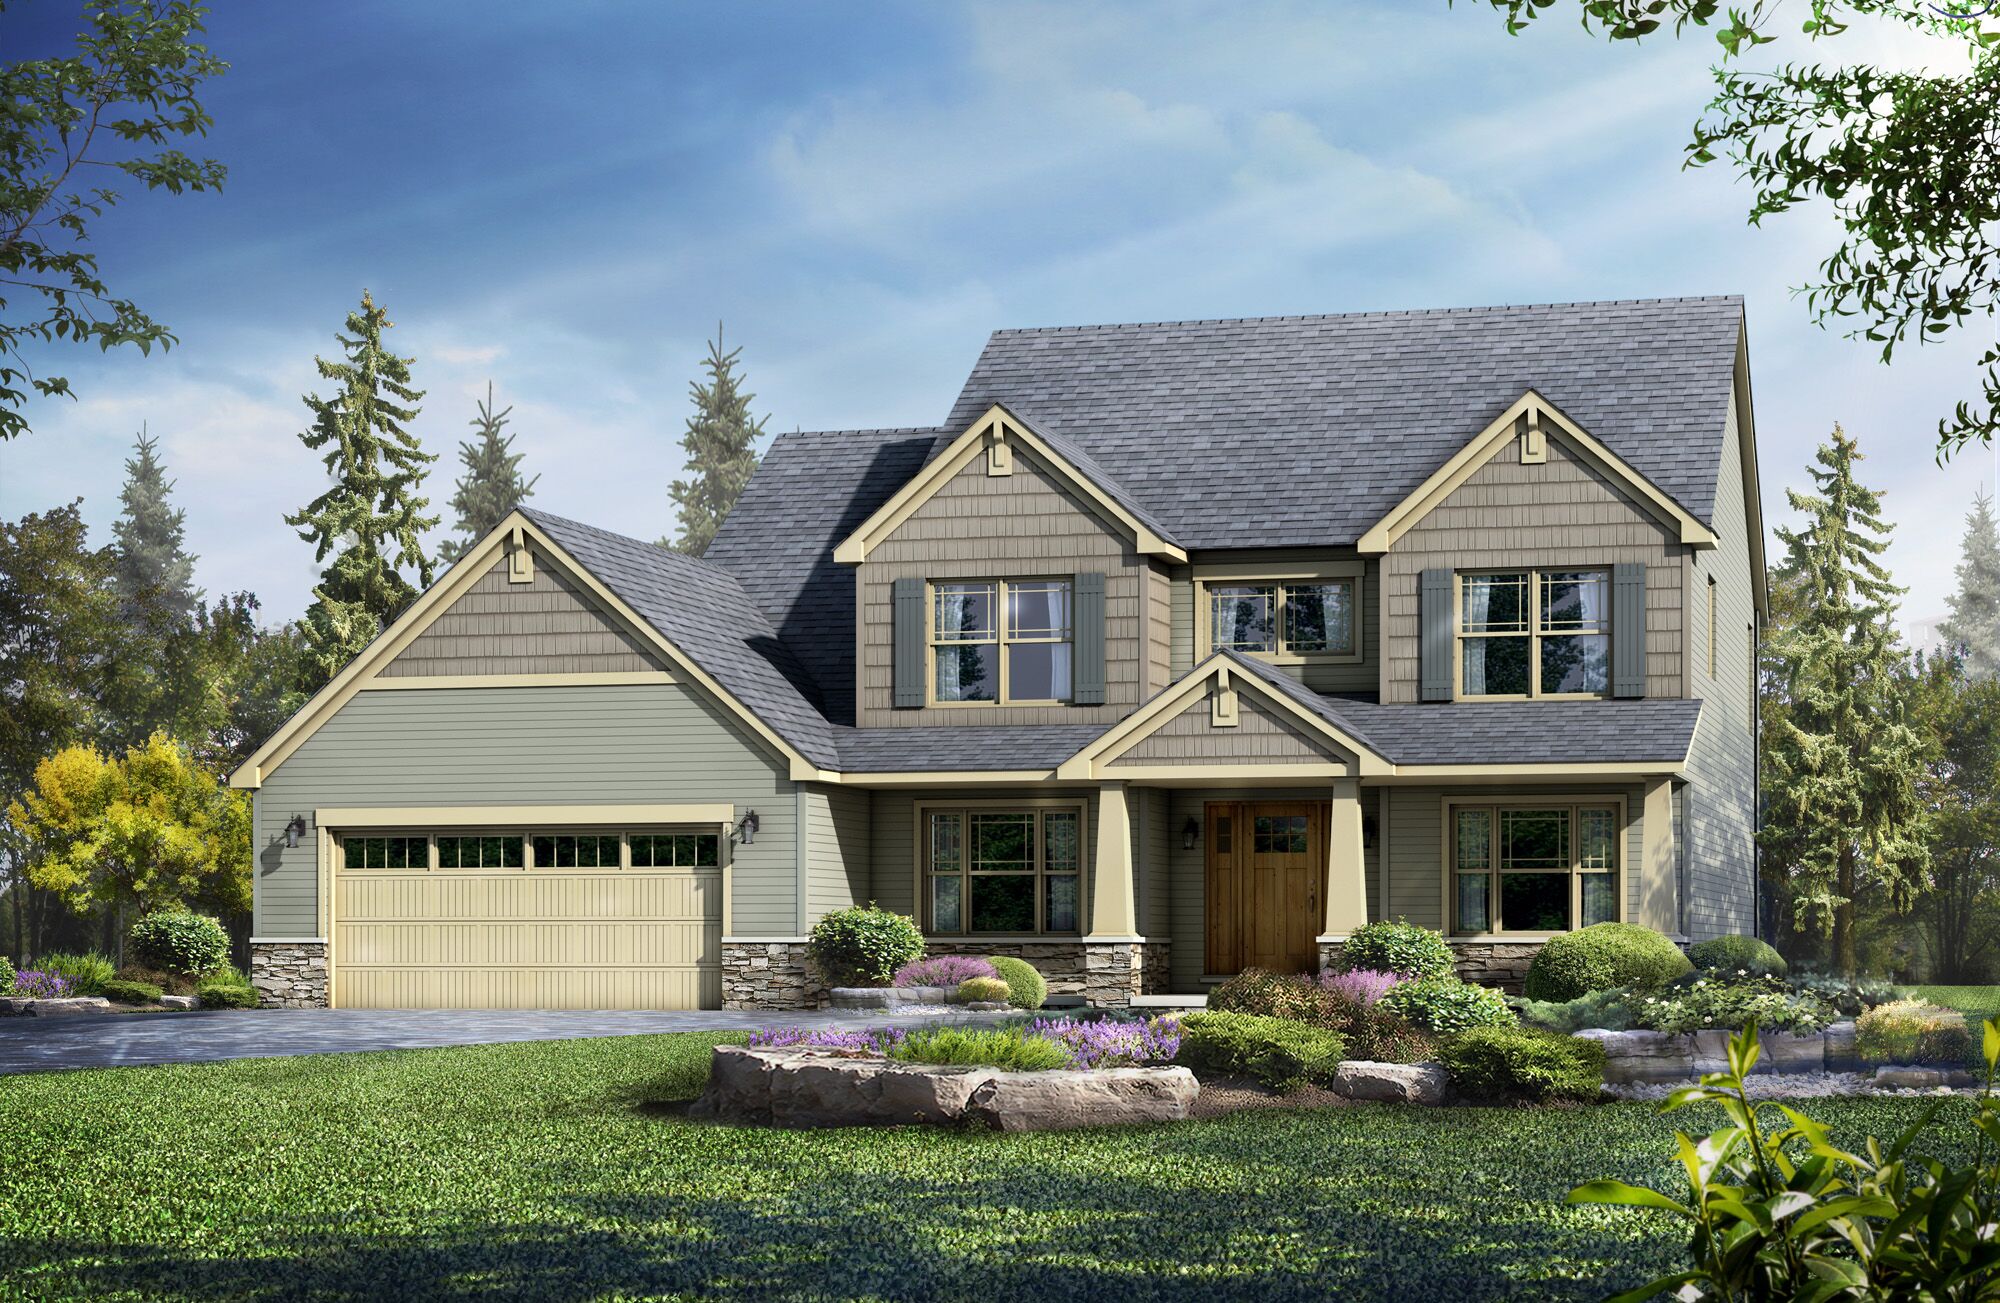 Exterior Rendering - Single Family House - 3D House Rendering | Aareas Interactive